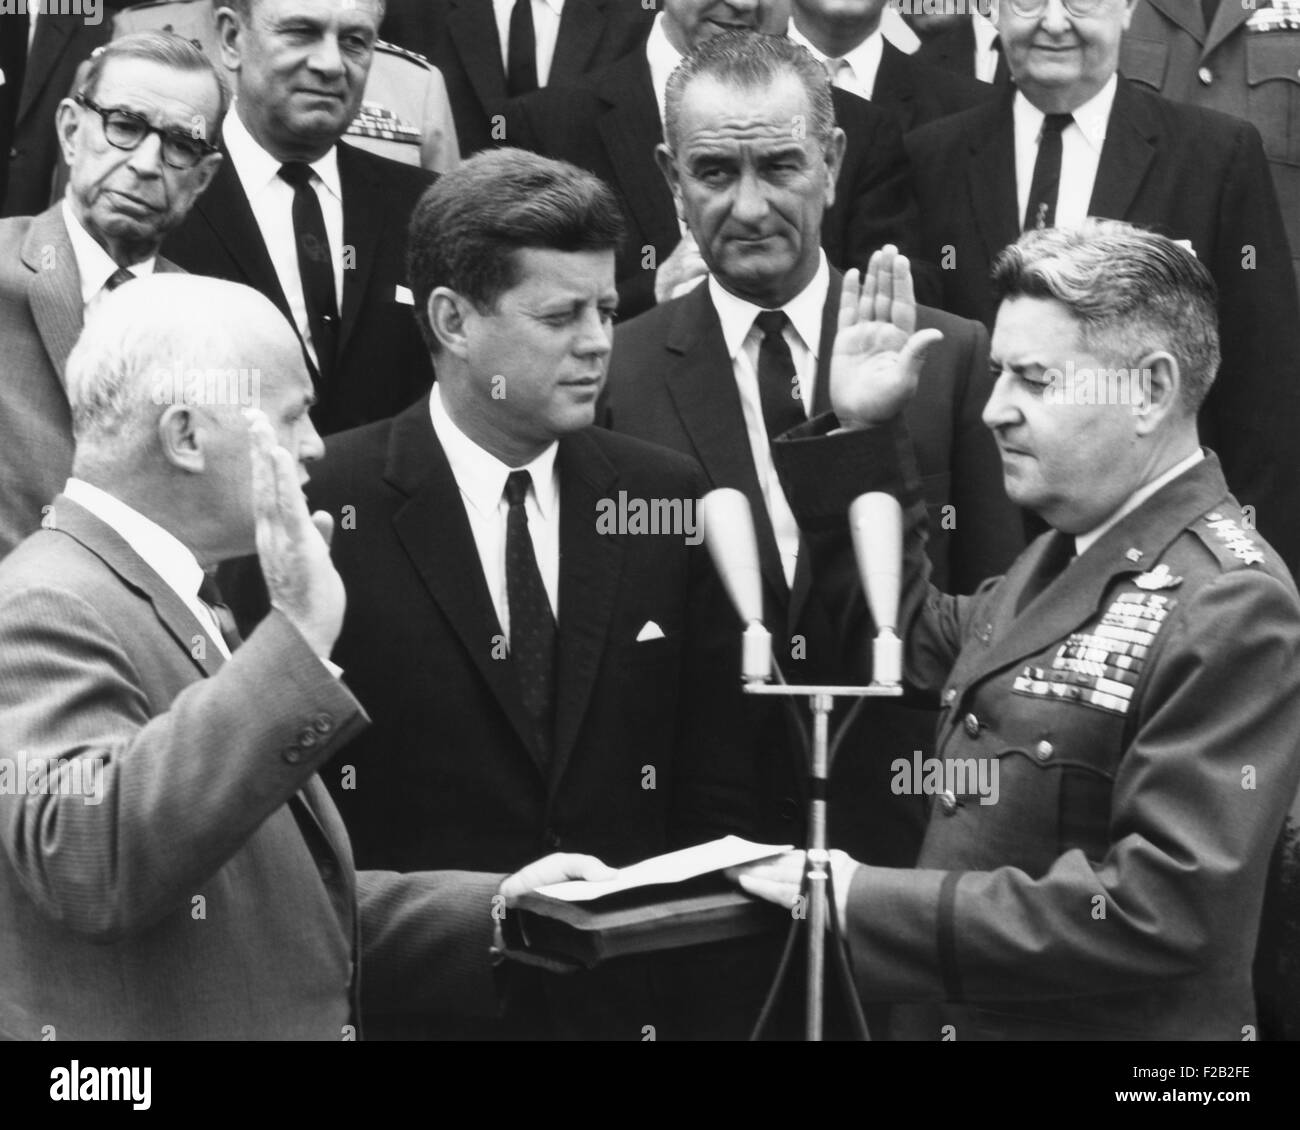 General Curtis LeMay (right) is sworn in as Air Force Chief of Staff, June 30, 1961. President Kennedy refused his reckless advice during the Cuban Missile Crisis, when LeMay urged the bombing of the Soviet nuclear missile sites in Cuba. (CSU 2015 8 533) Stock Photo